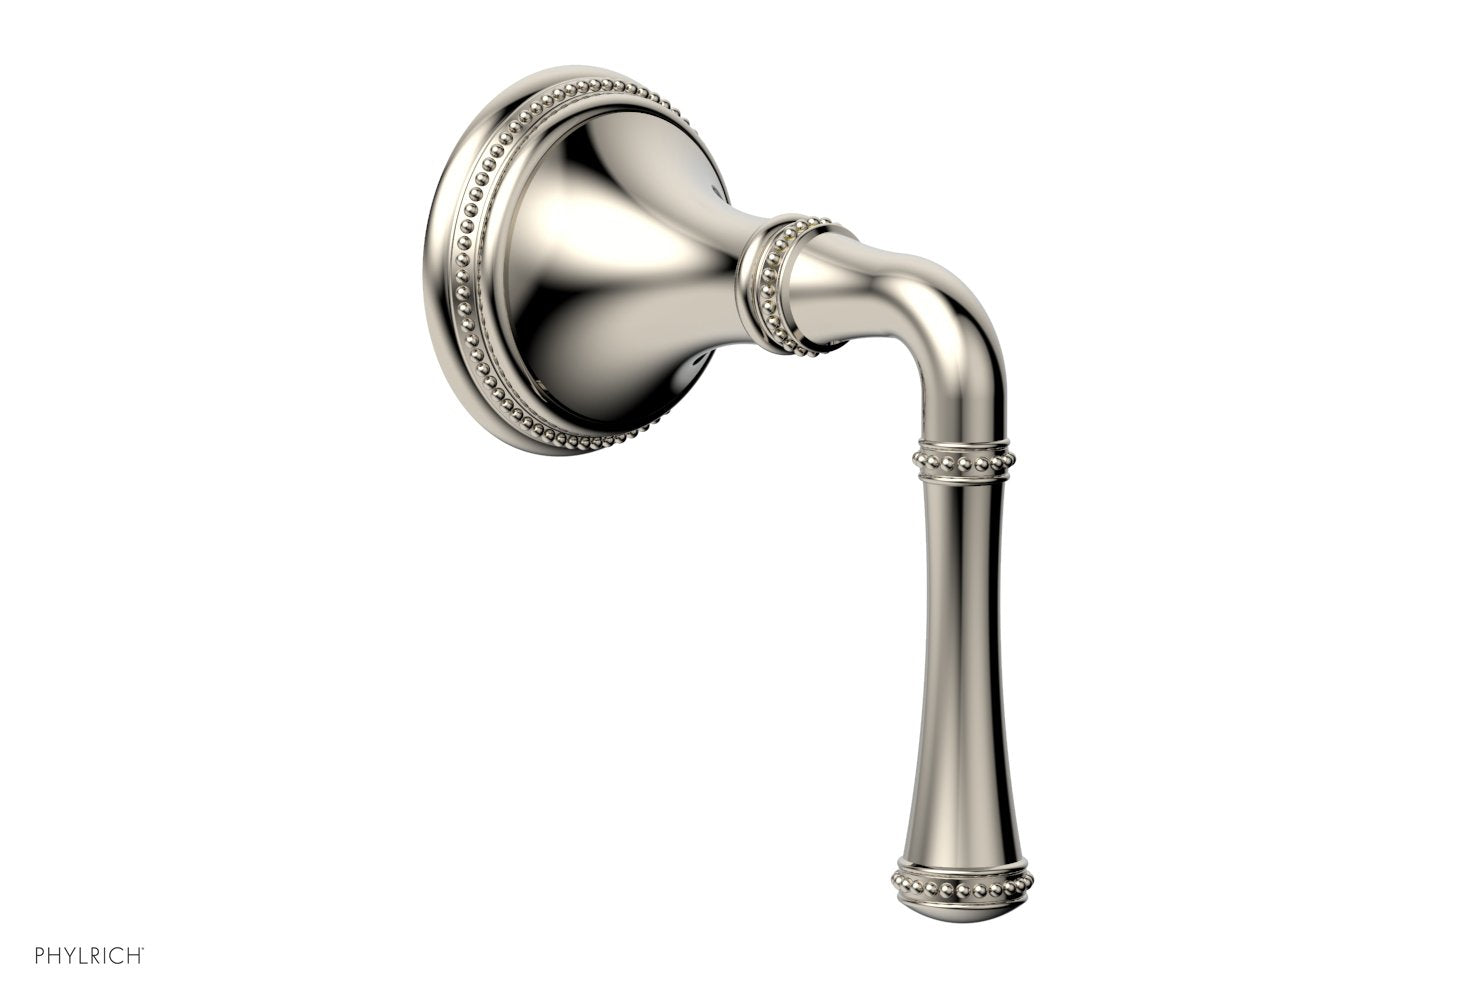 Phylrich BEADED Volume Control/Diverter Trim -Lever Handle